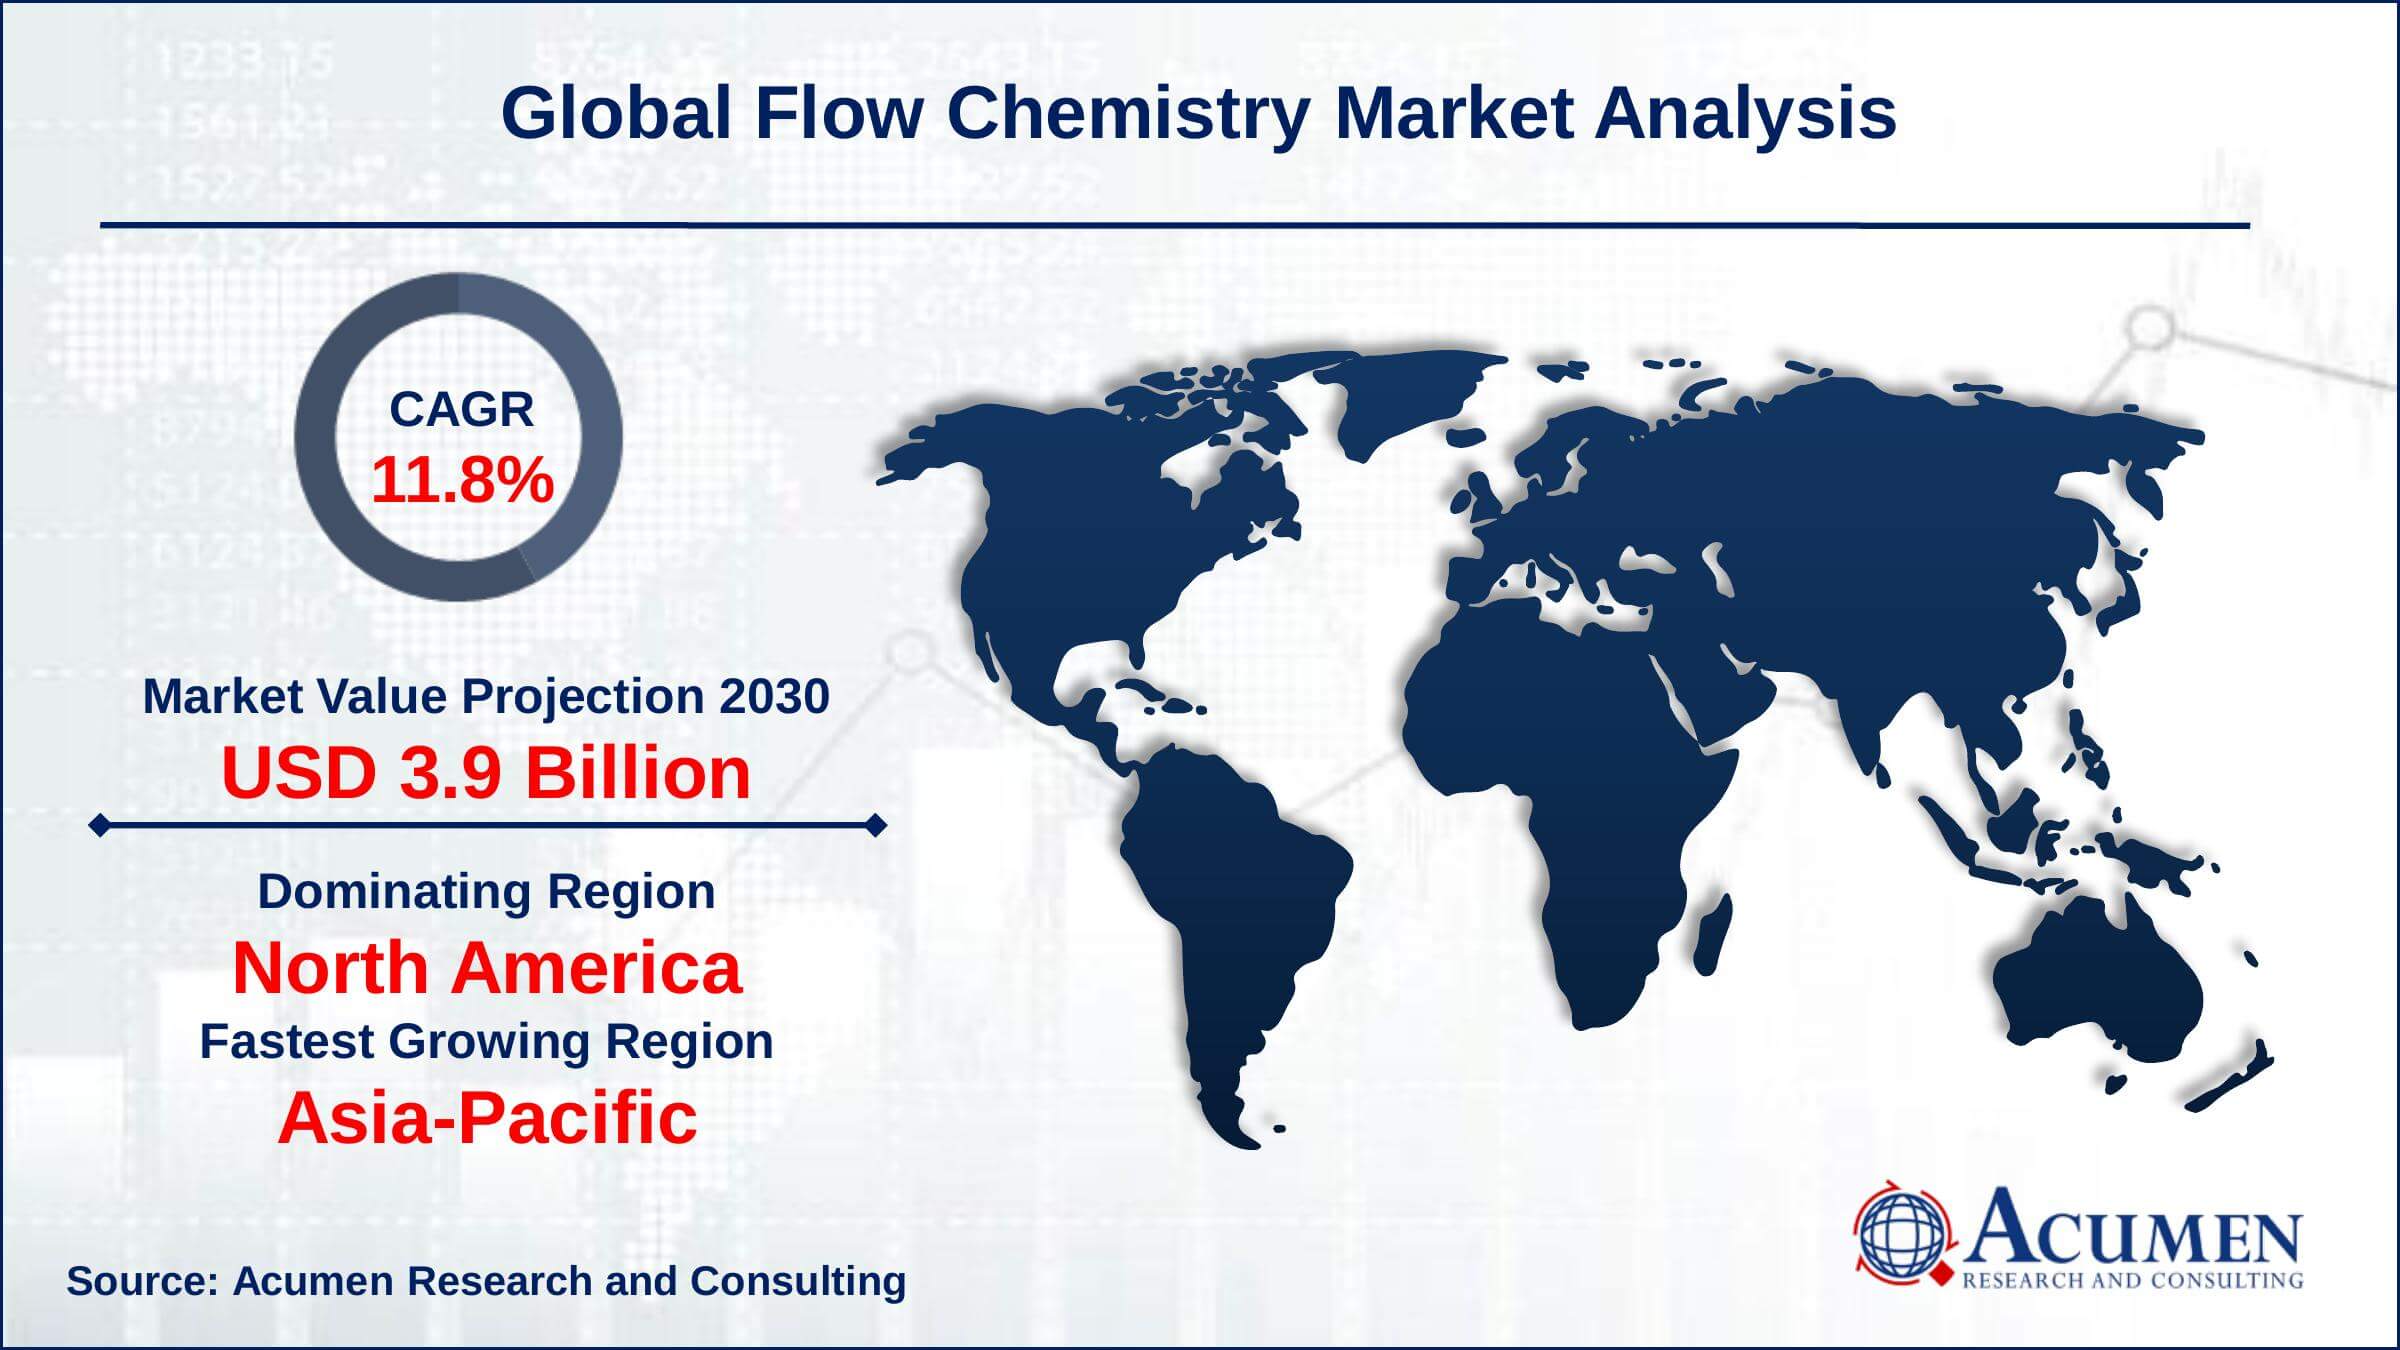 Global flow chemistry market revenue is projected to reach USD 3.9 Billion by 2030 with a CAGR of 11.8% from 2022 to 2030